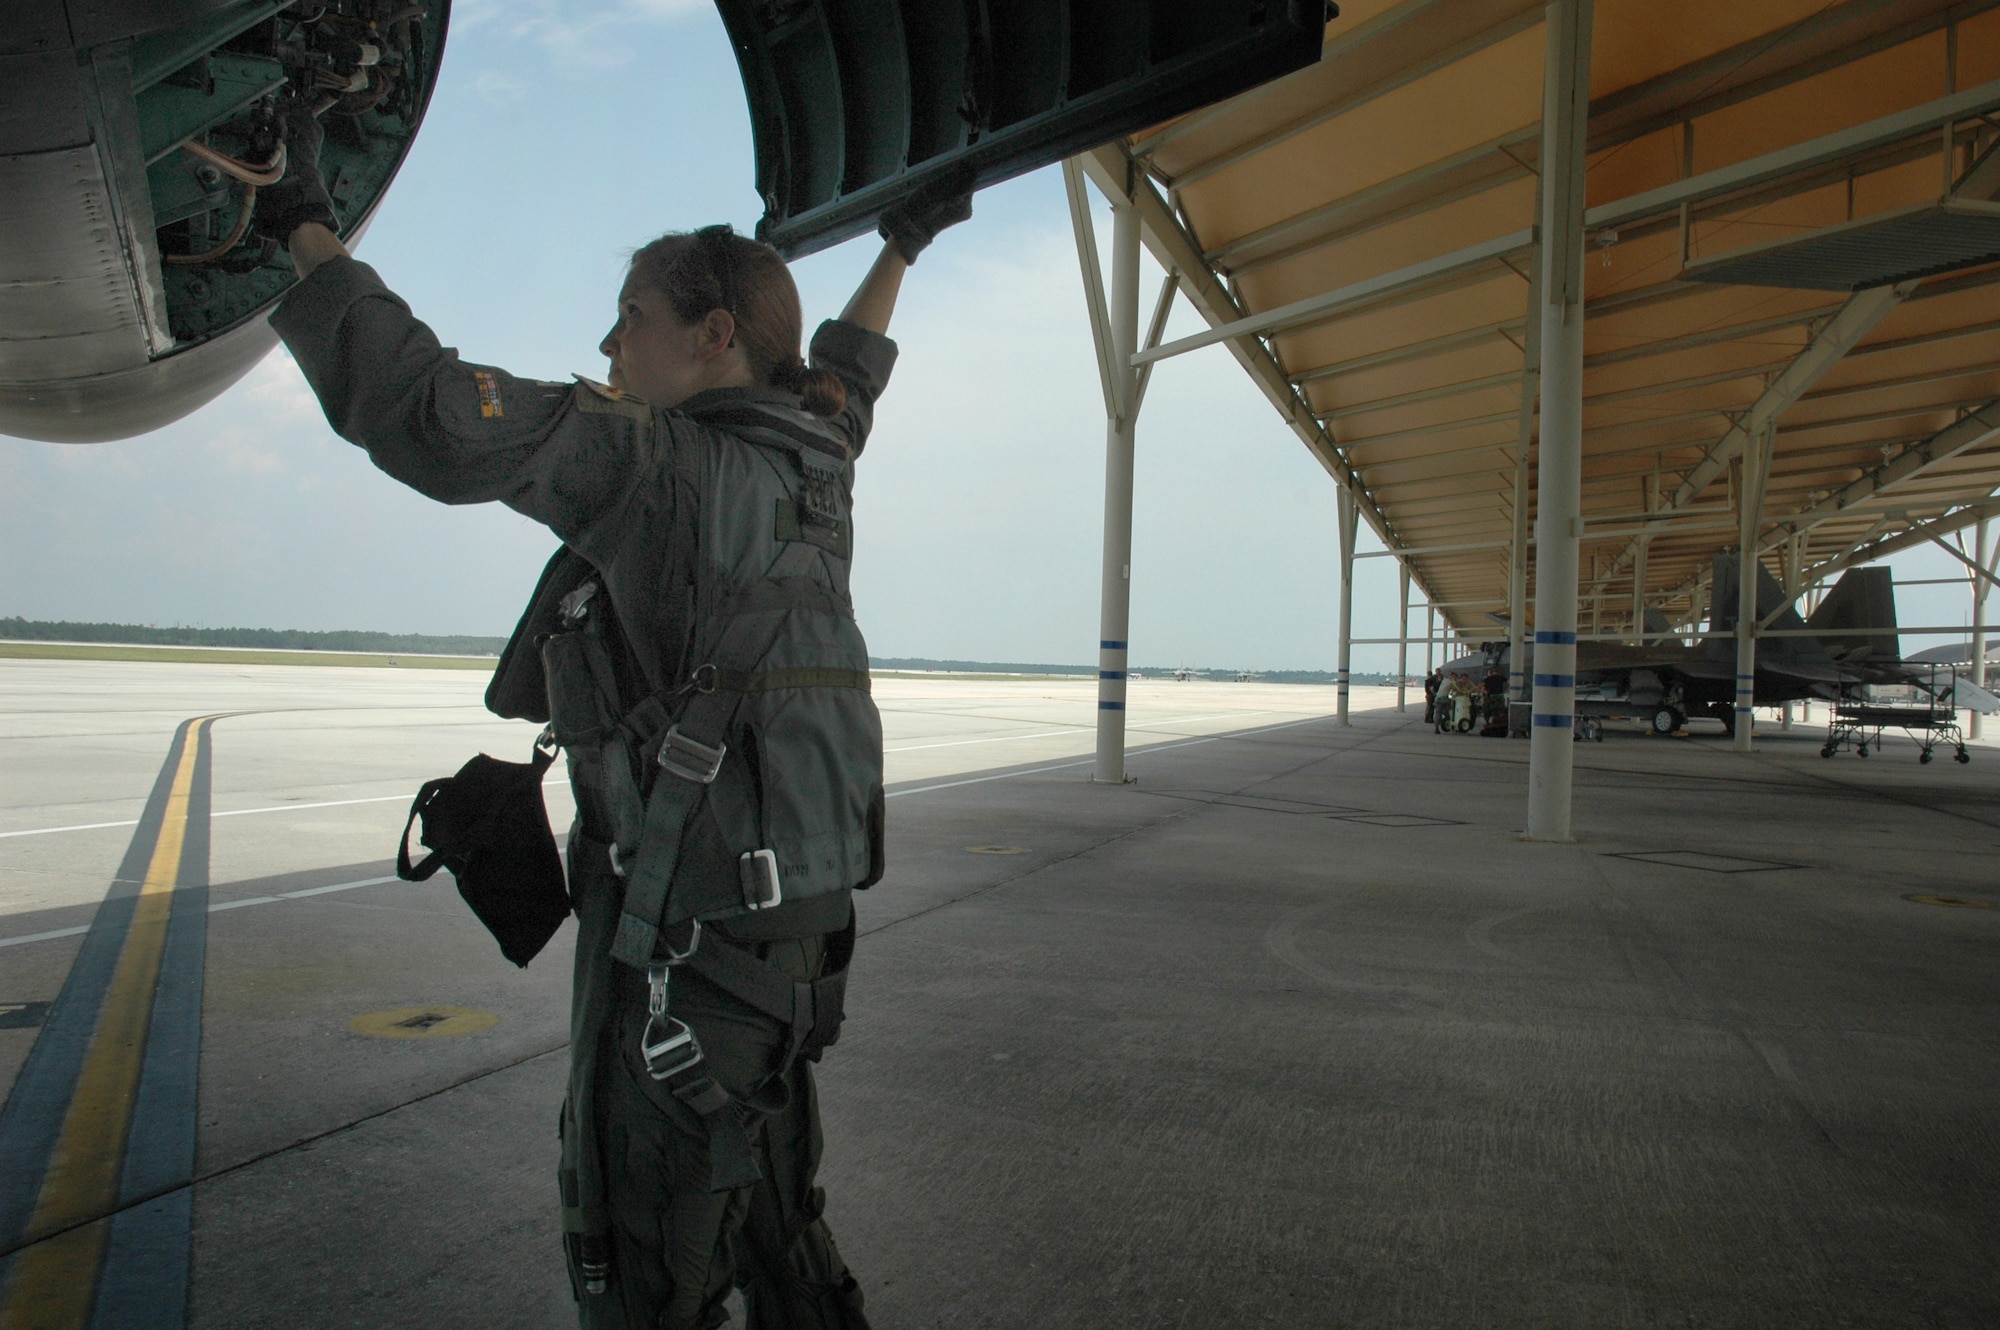 TYNDALL AIR FORCE BASE, Fla. - Captain Jaina Wright, 336th Fighter Squadron F-15E Strike Eagle pilot, conducts a pre-flight inspection before executing a dissimilar air combat tactics sortie against F-22 Raptor aircraft at Tyndall Air Force Base June 18. Captain Wright and fellow Strike Eagle aircrew members conducted DACT training at Tyndall AFB June 16-20. (U.S. Air Force photo by Capt. Amanda Ferrell)